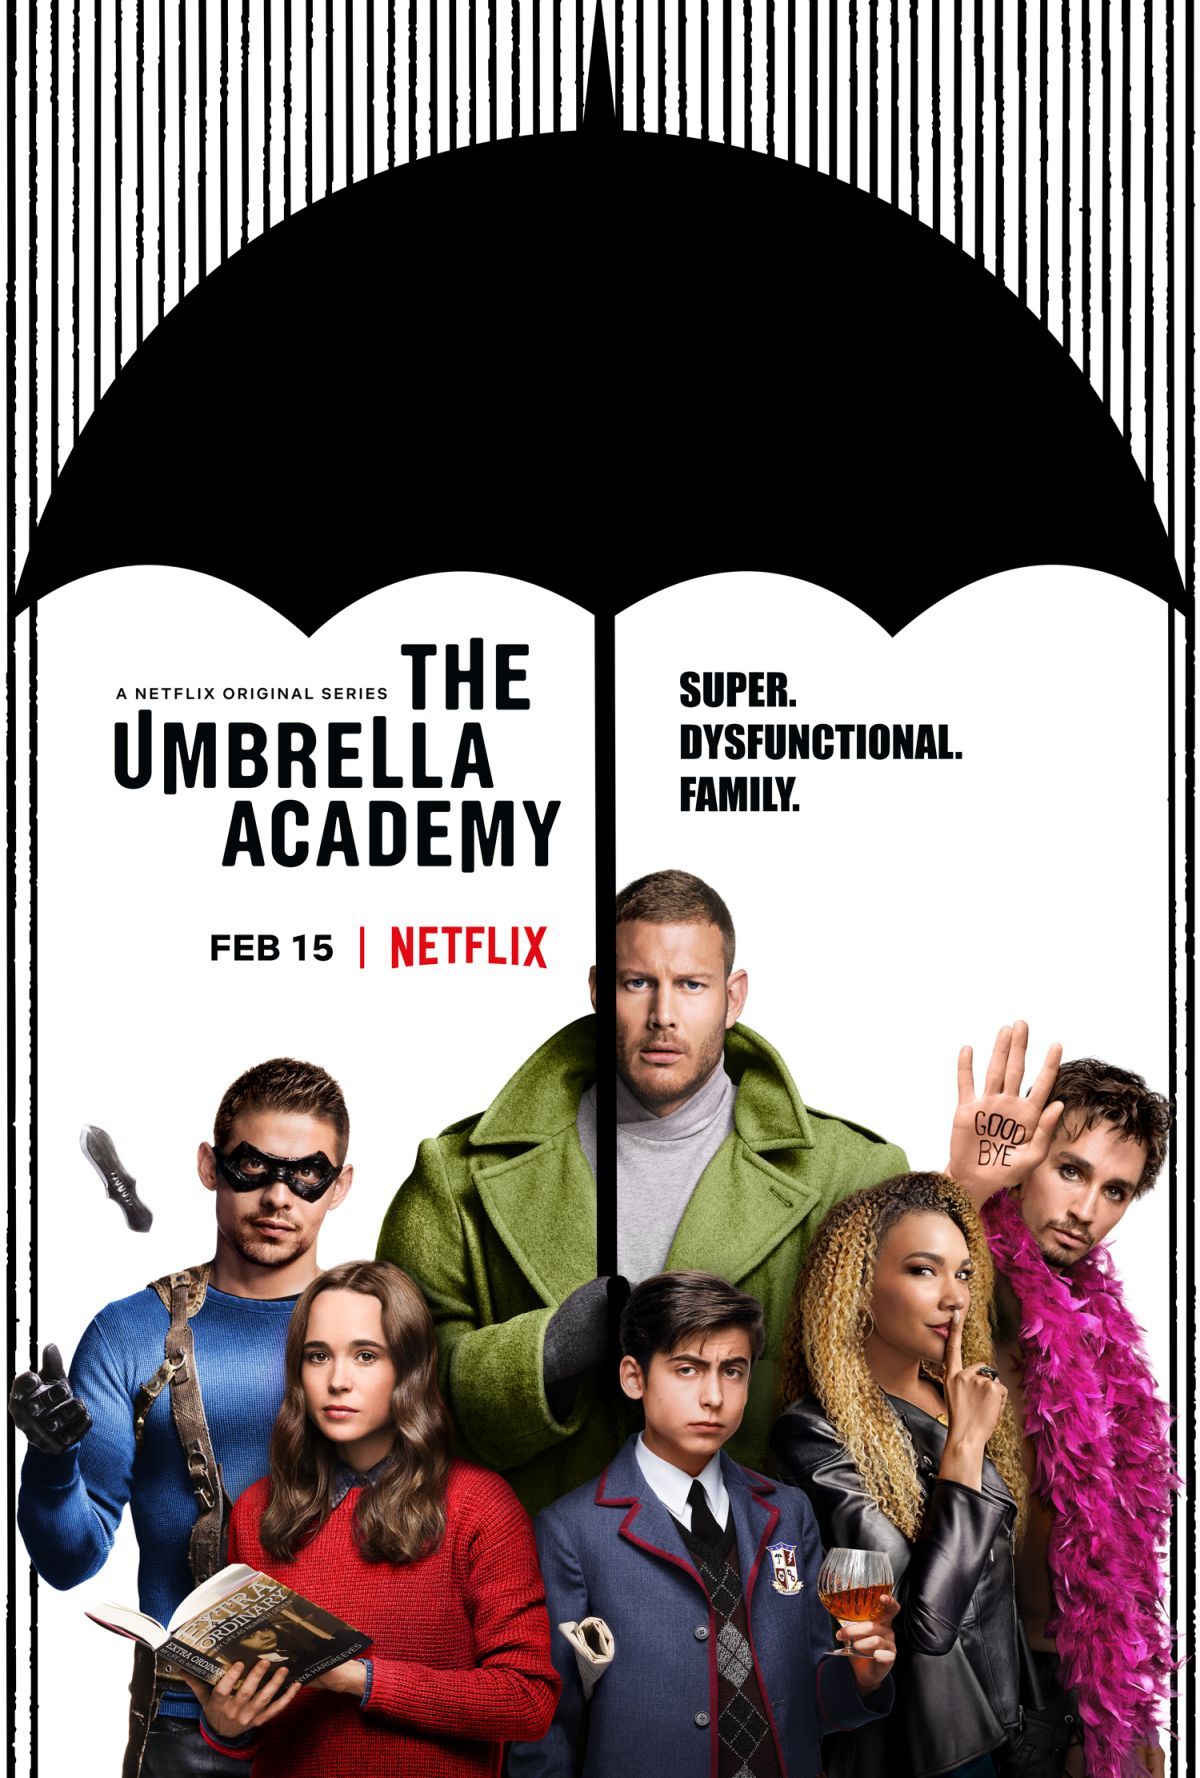 Premiere: Jeff Russo “Hazel and Delores” From The Umbrella Academy Soundtrack ...1200 x 1778